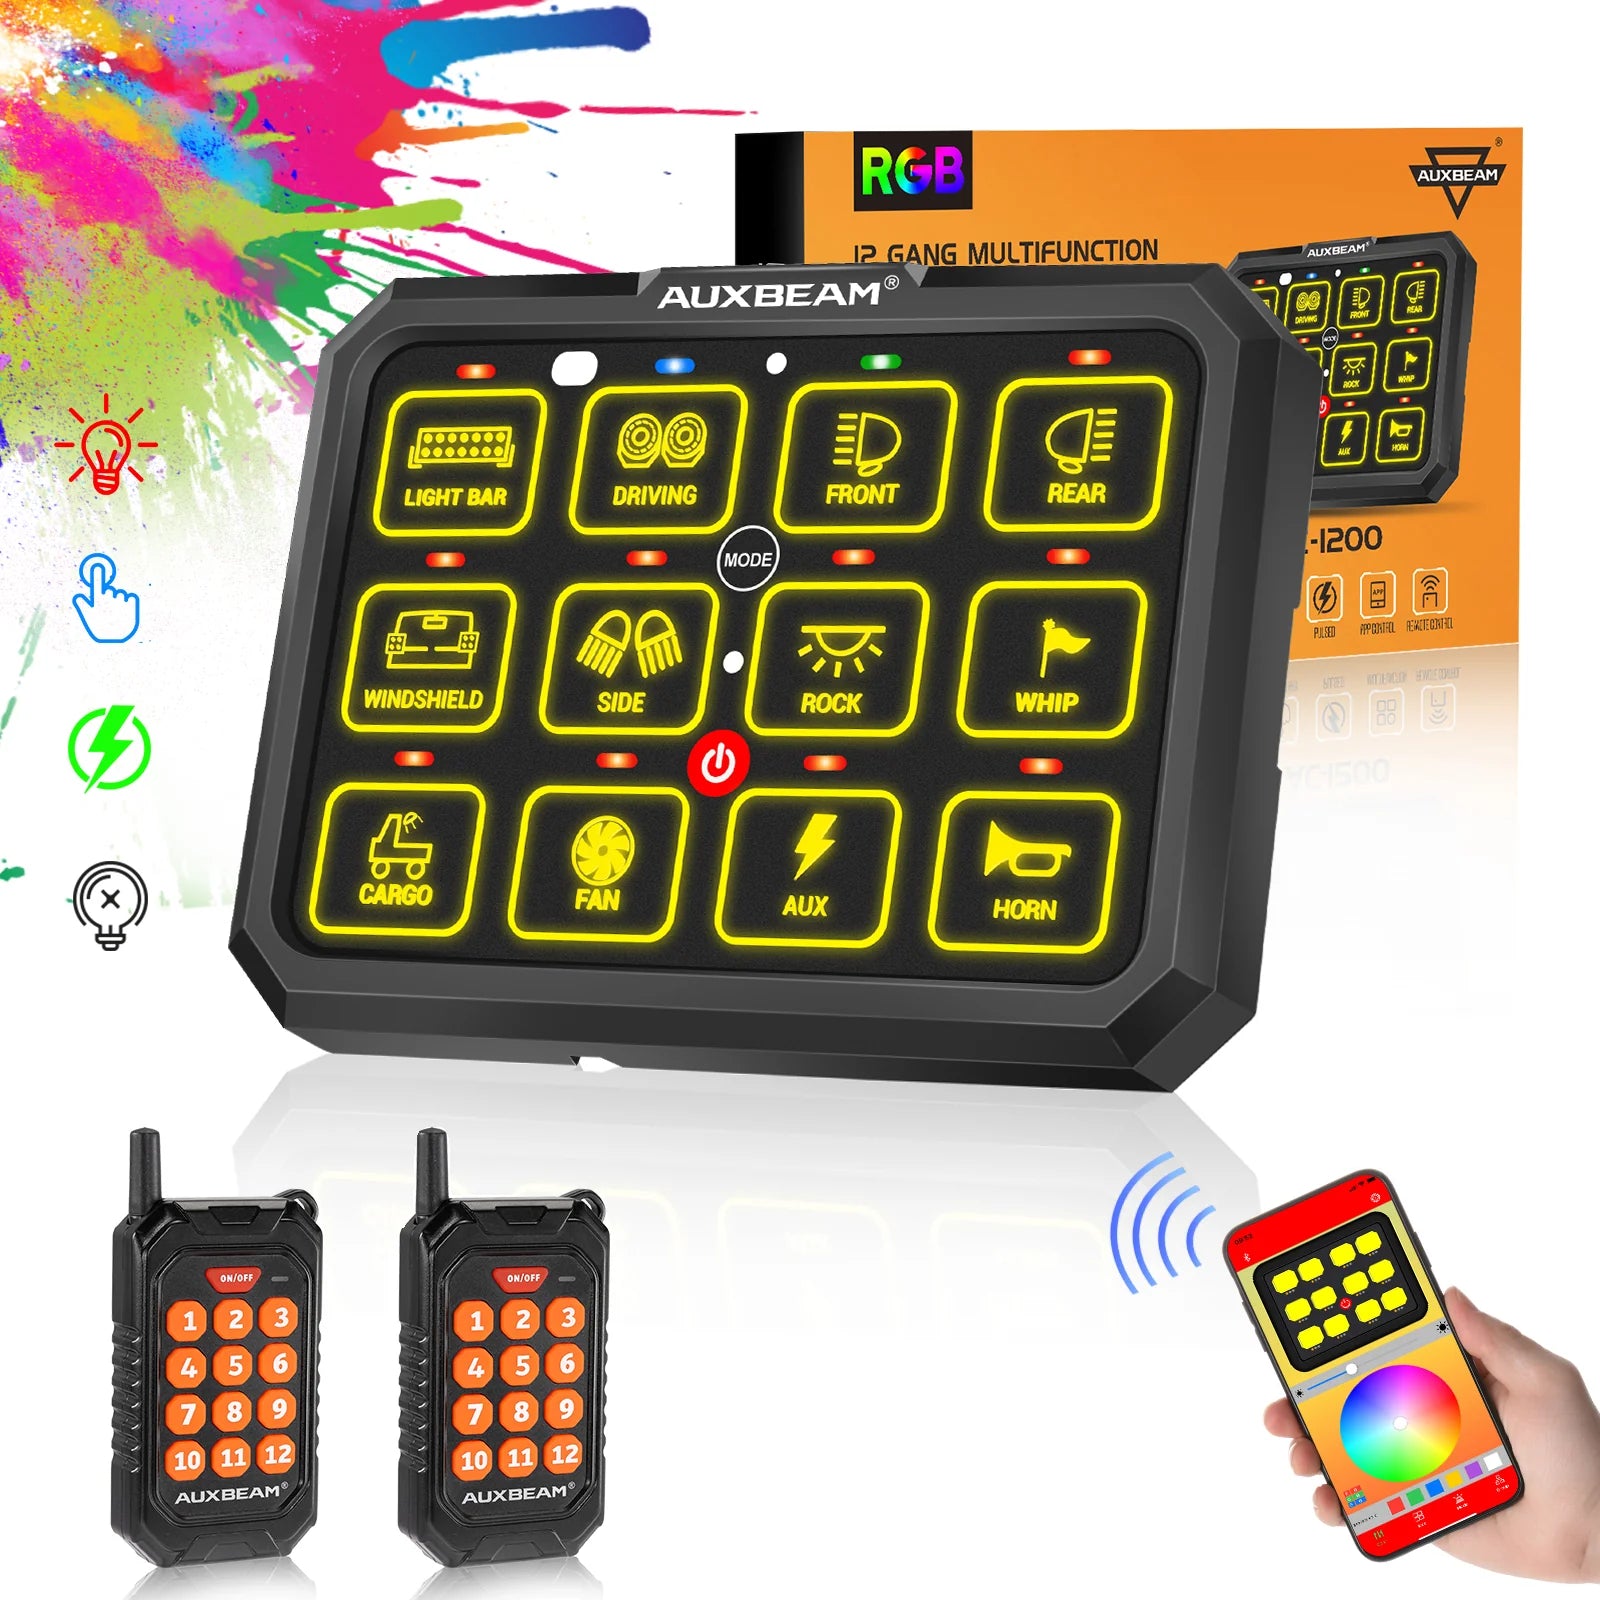 AC-1200 RGB SWITCH PANEL WITH APP&REMOTE CONTROL, TOGGLE/ MOMENTARY/ PULSED MODE SUPPORTED(ONE-SIDED OUTLET)